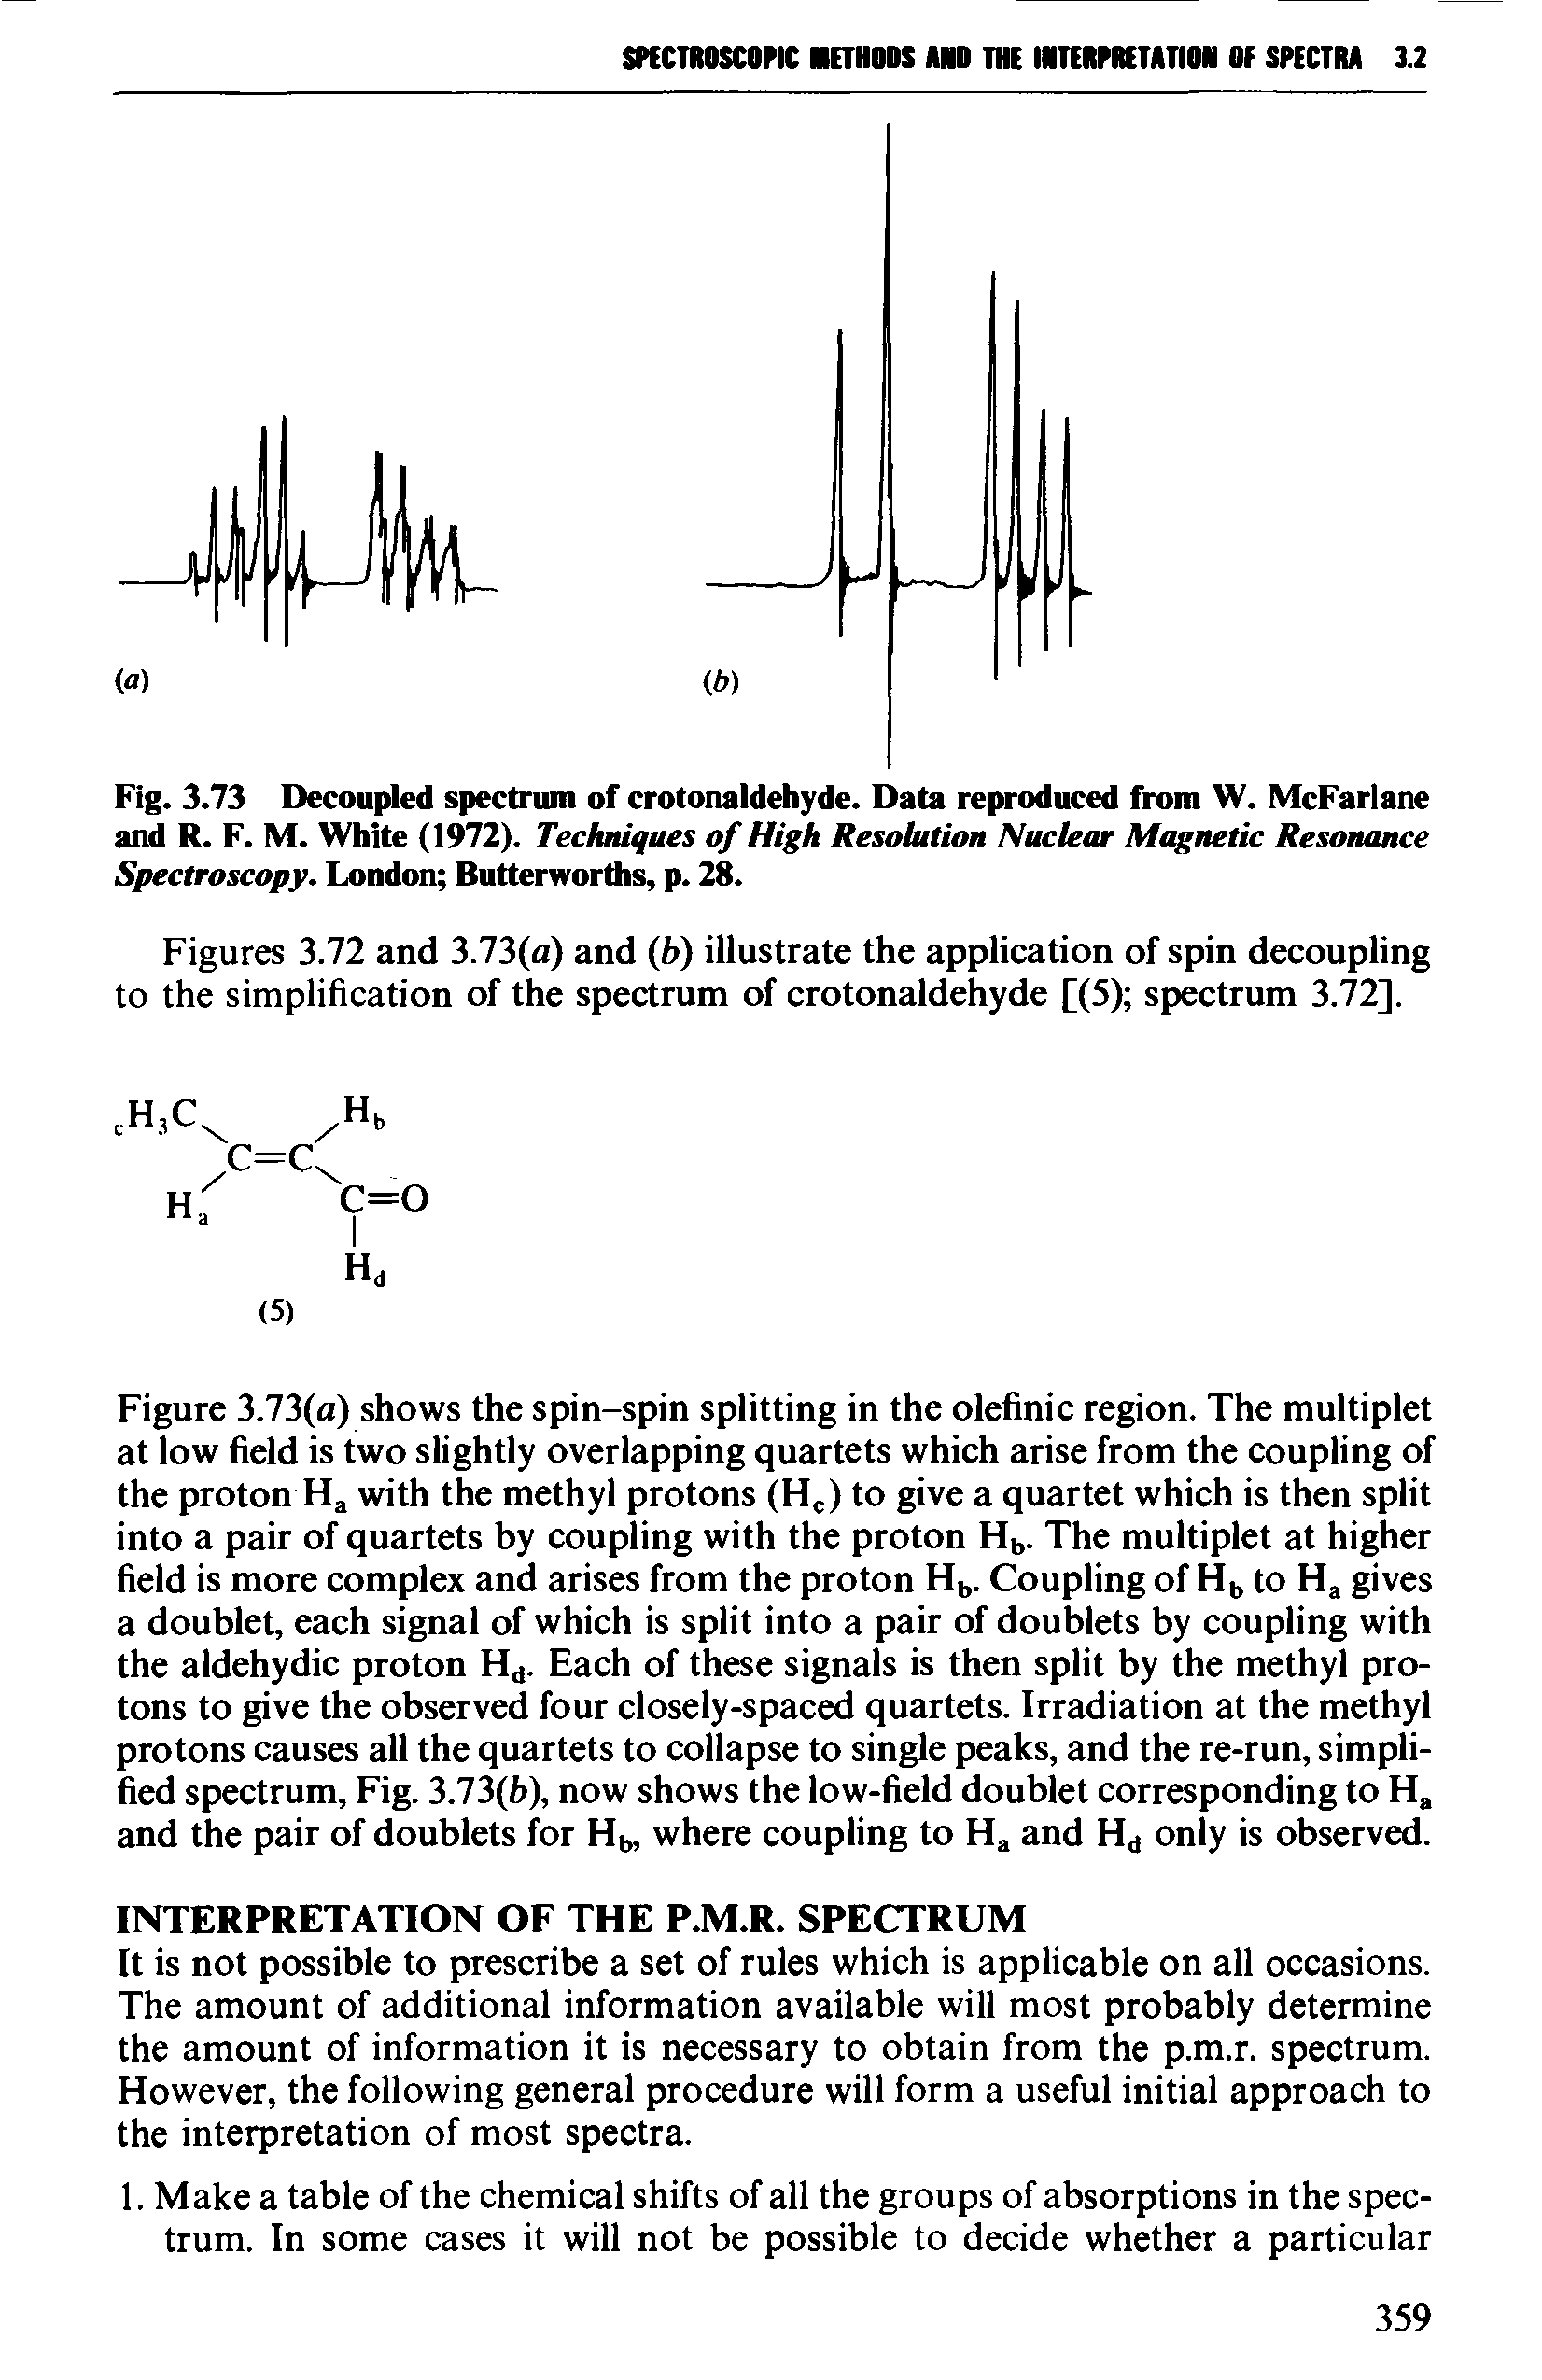 Fig. 3.73 Decoupled spectrum of crotonaldehyde. Data reproduced from W. McFarlane and R. F. M. White (1972). Techniques of High Resolution Nuclear Magnetic Resonance Spectroscopy. London Butterworths, p. 28.